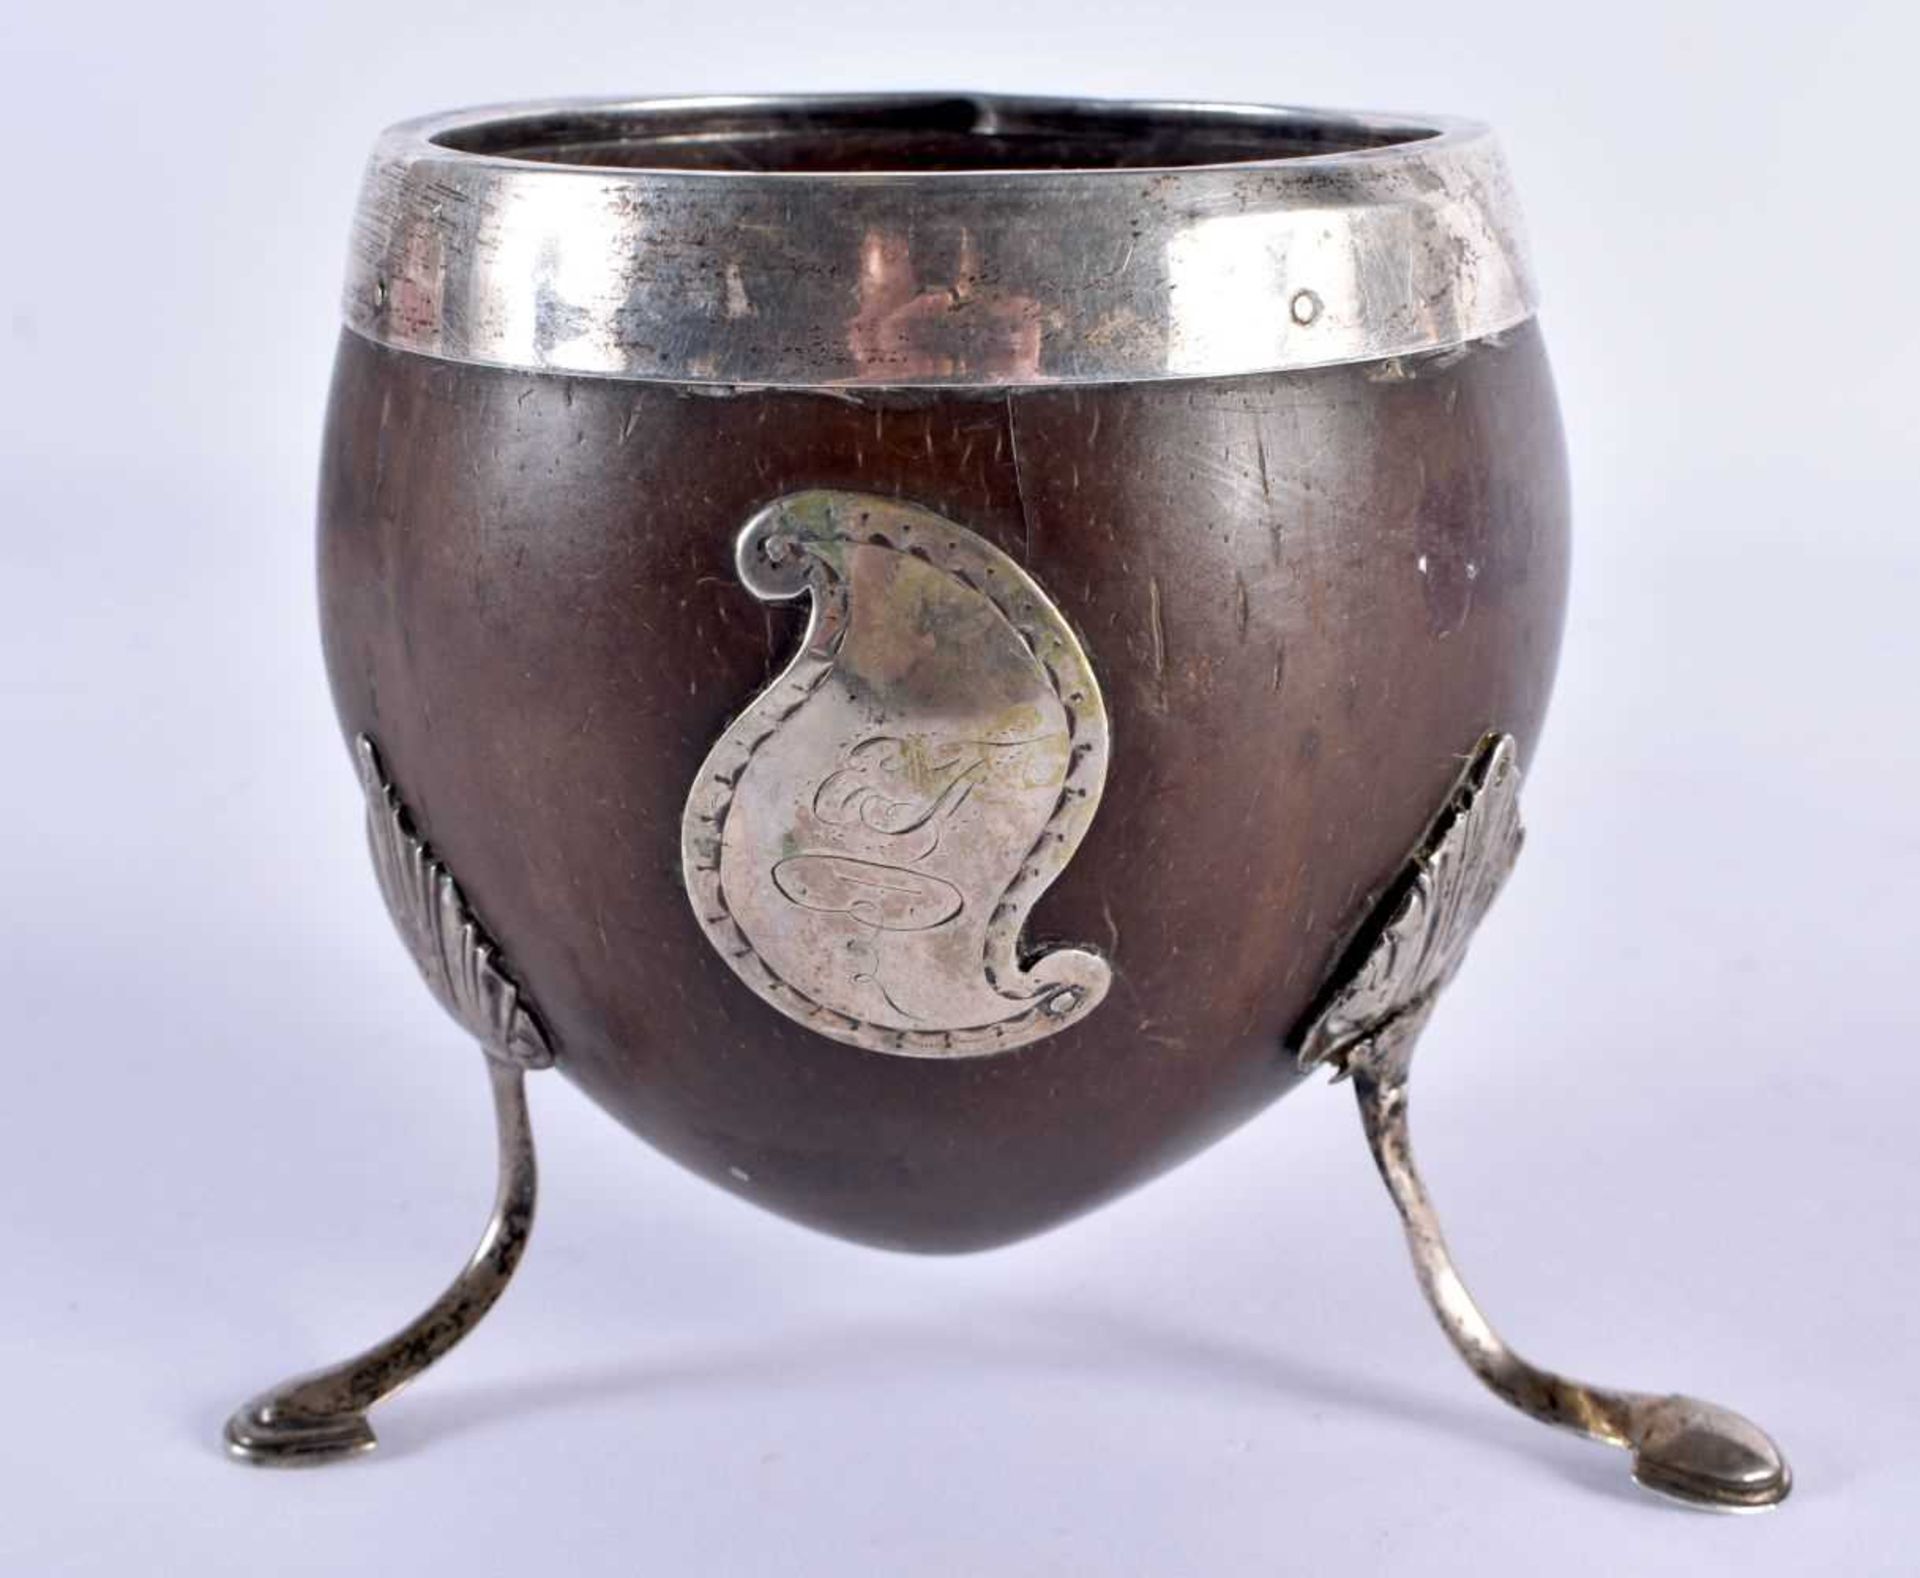 A GEORGE III WHITE METAL MOUNTED COCONUT CUP formed with a scrolling cartouche, upon splayed legs.